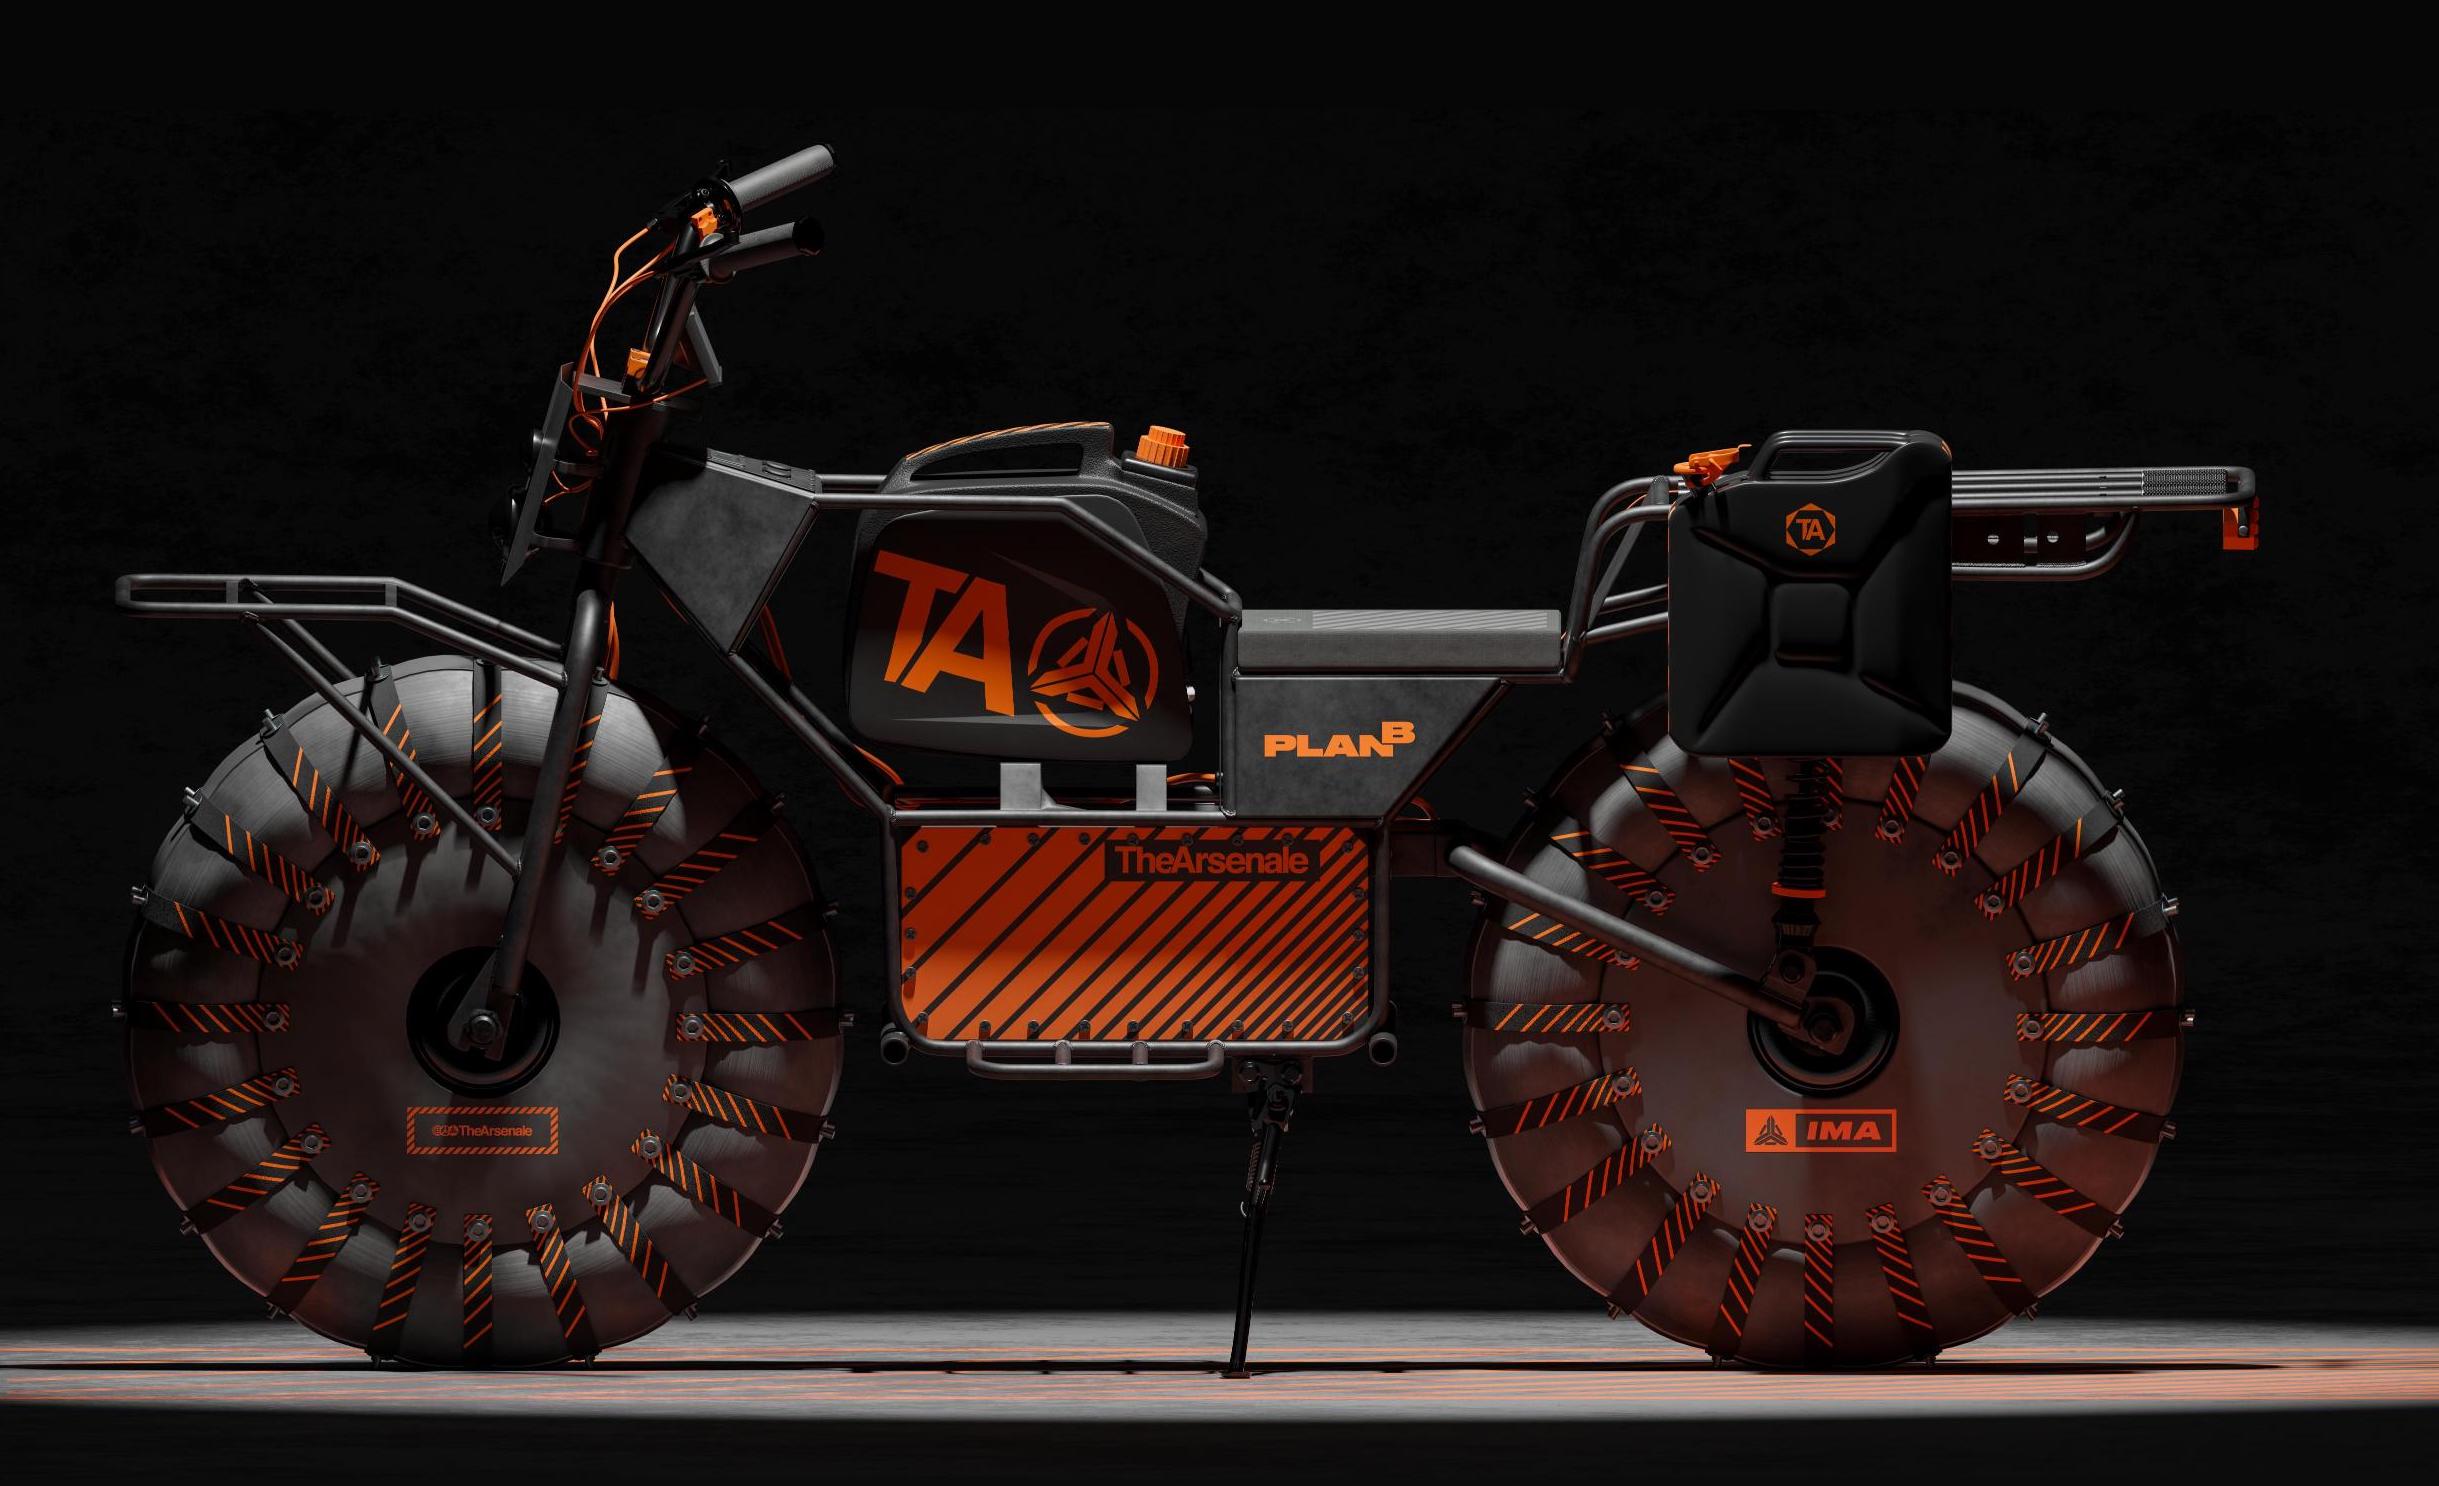 Swim Over Obstacles With All-Terrain E-Moto Powered by Gasoline